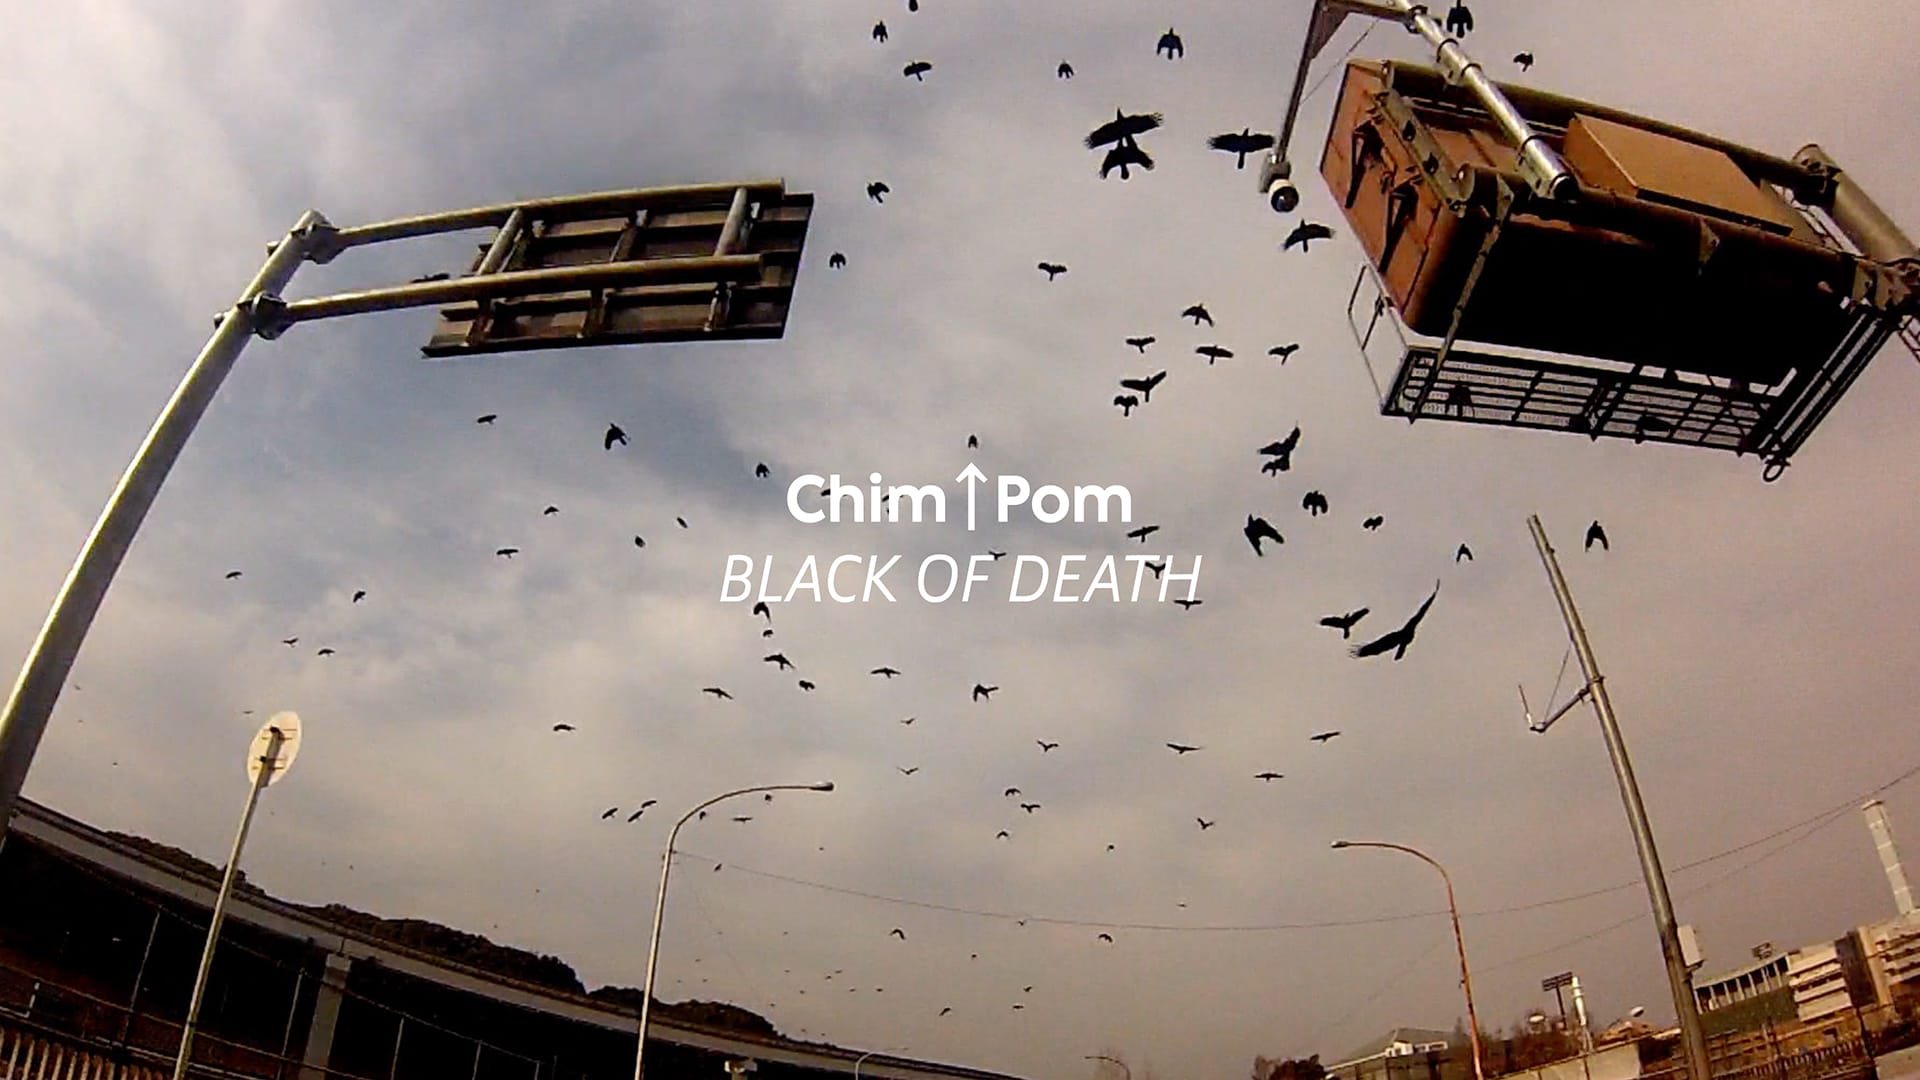 Chim↑Pom, BLACK OF DEATH, 2013. Courtesy of the artist, ANOMALY and MUJIN-TO Production.